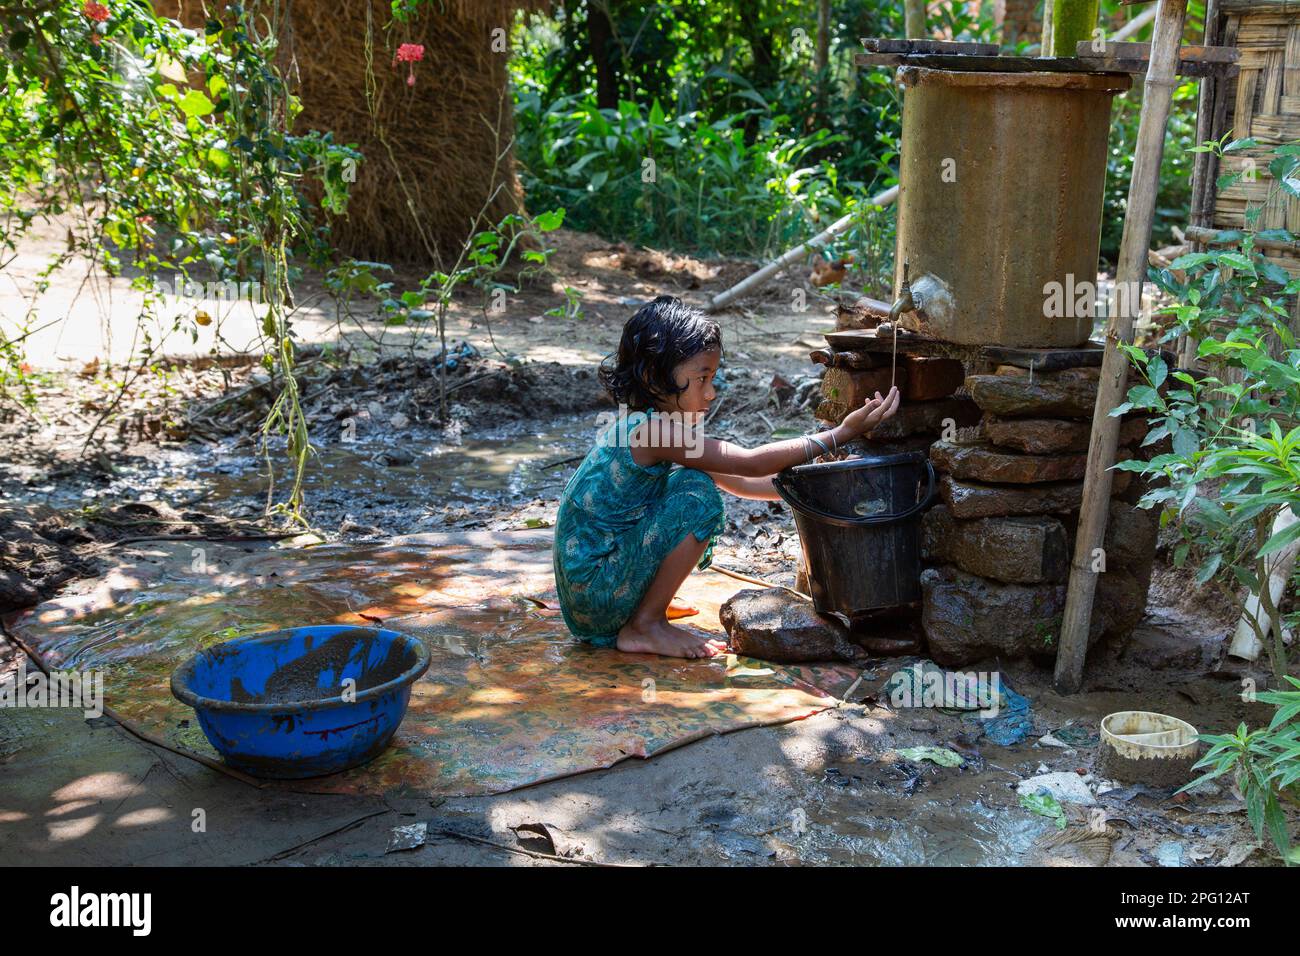 'Simple joys in the village: A little girl plays in tubewell water.' Photo Credit: Ripon Abraham Tolentino Stock Photo